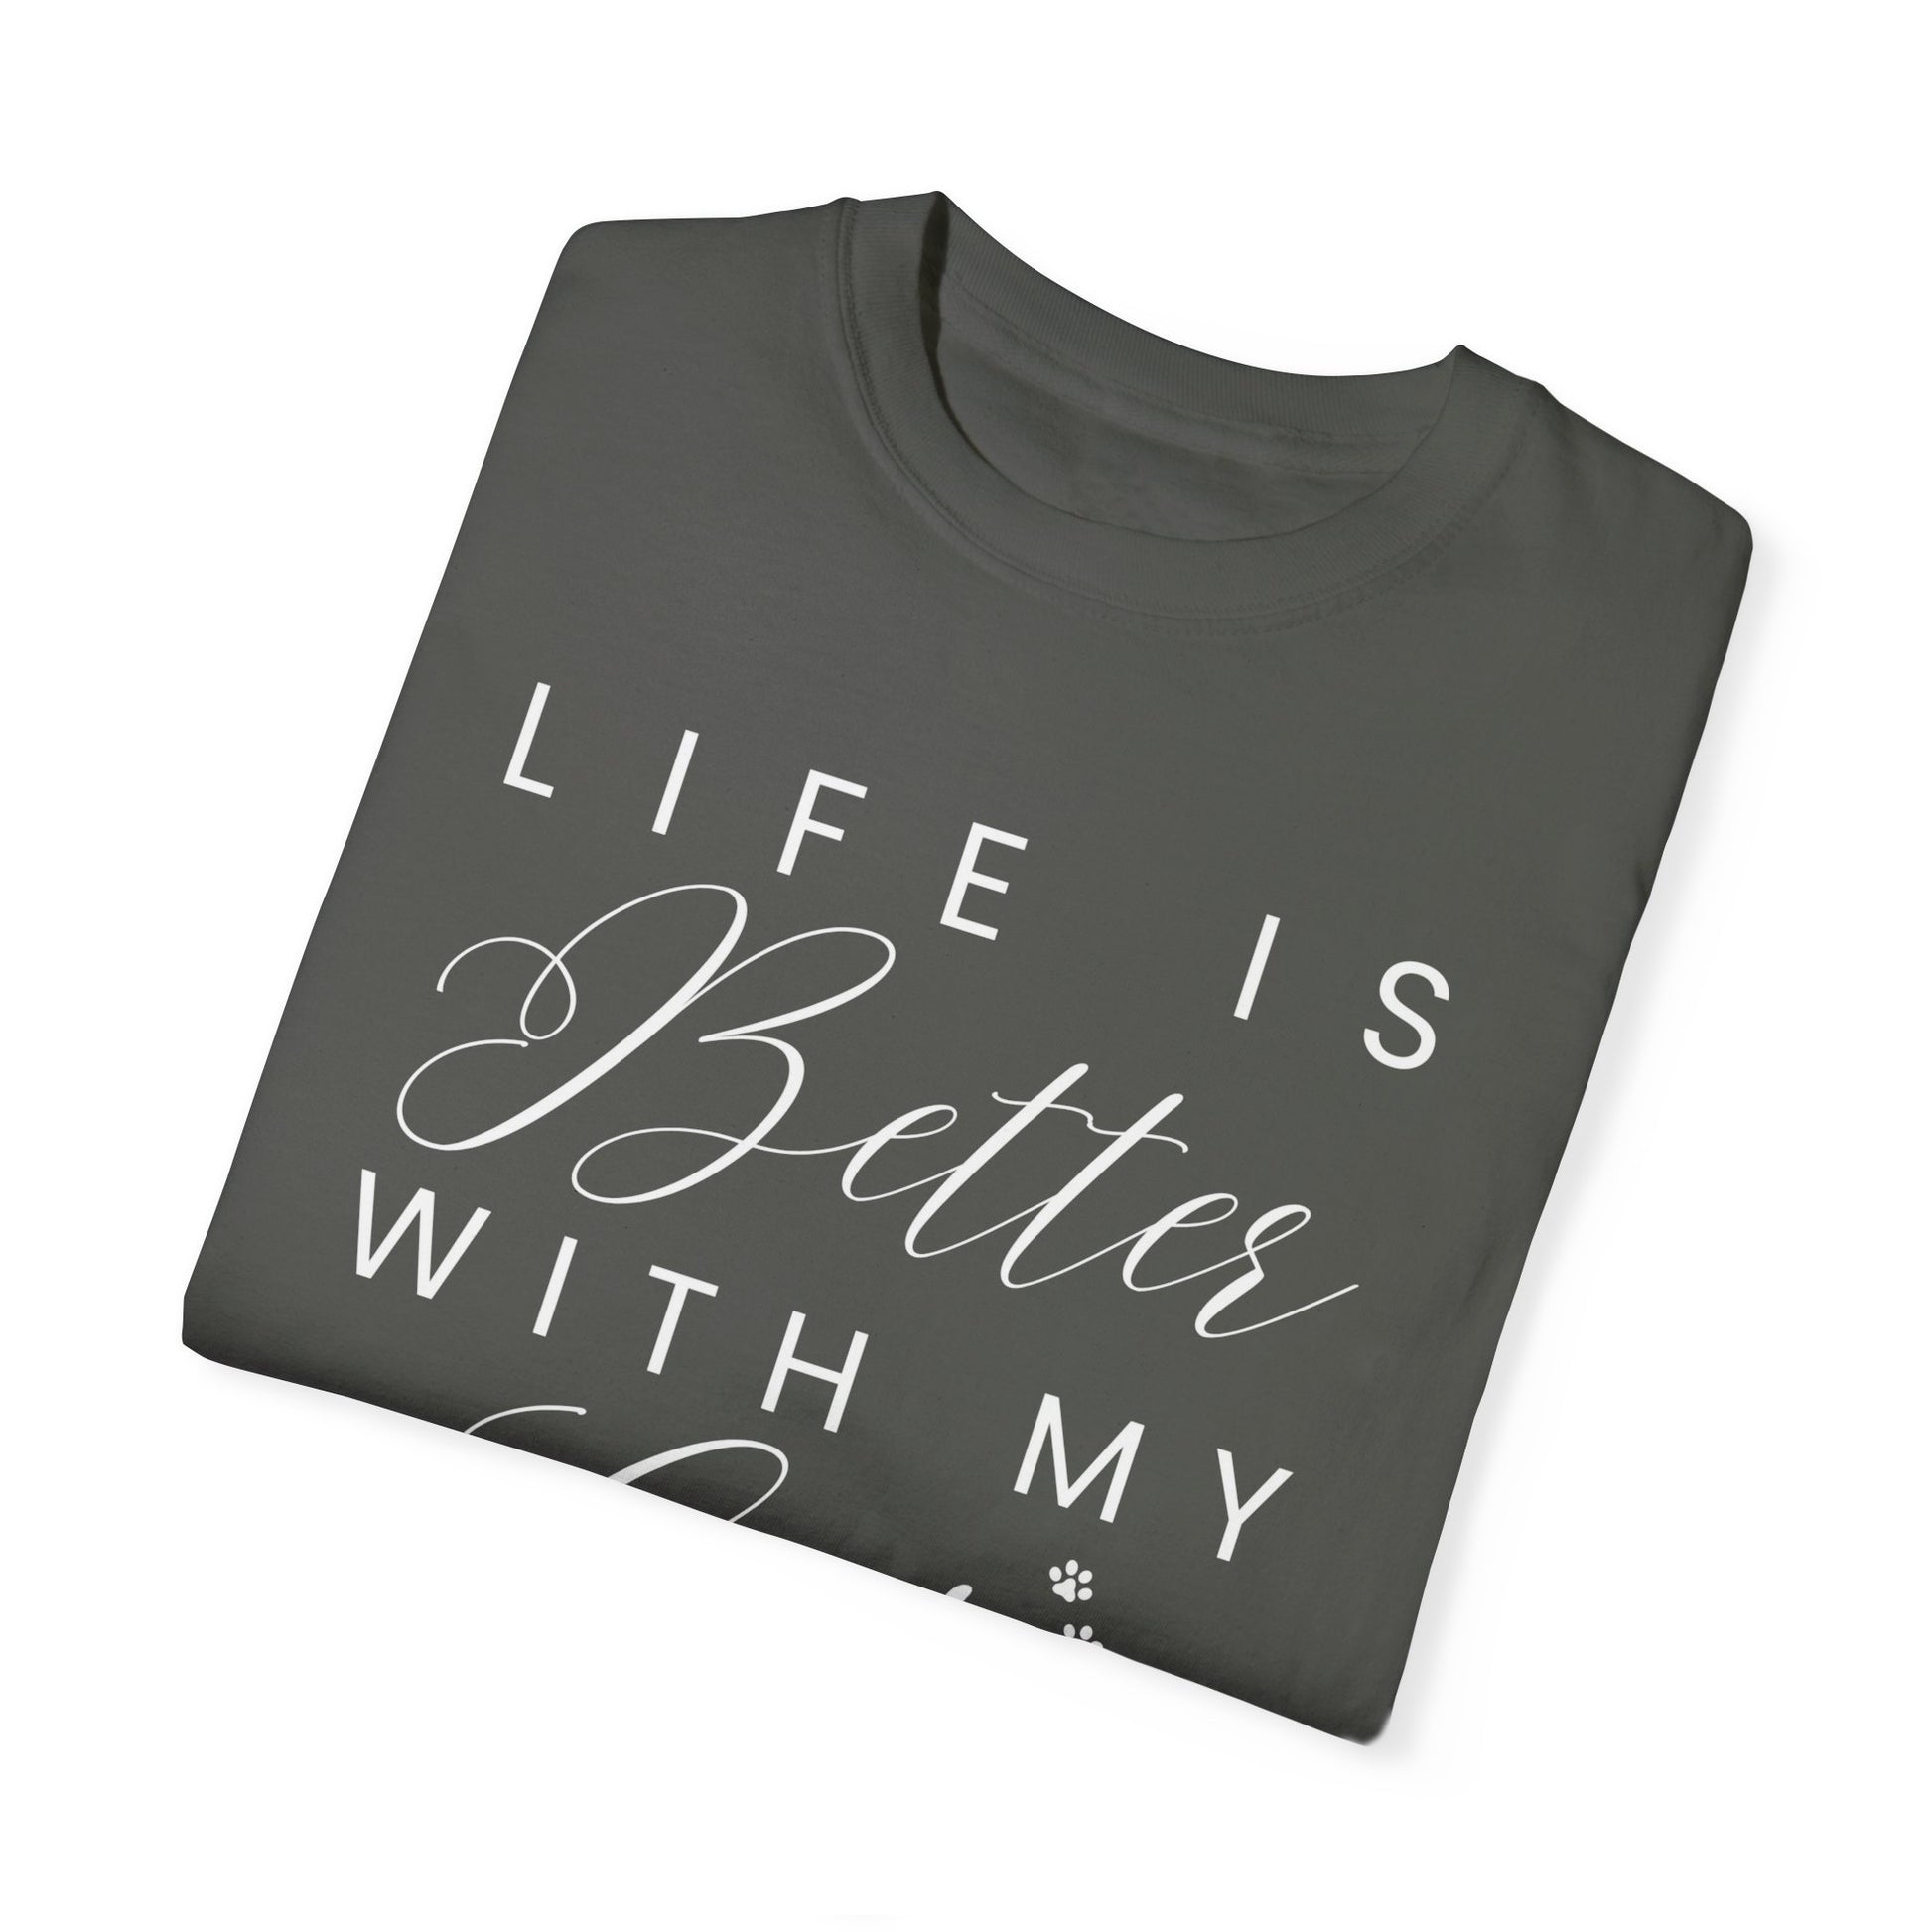 Women's Comfort Colors Tee - Life is Better with My Cats - Eddy and Rita